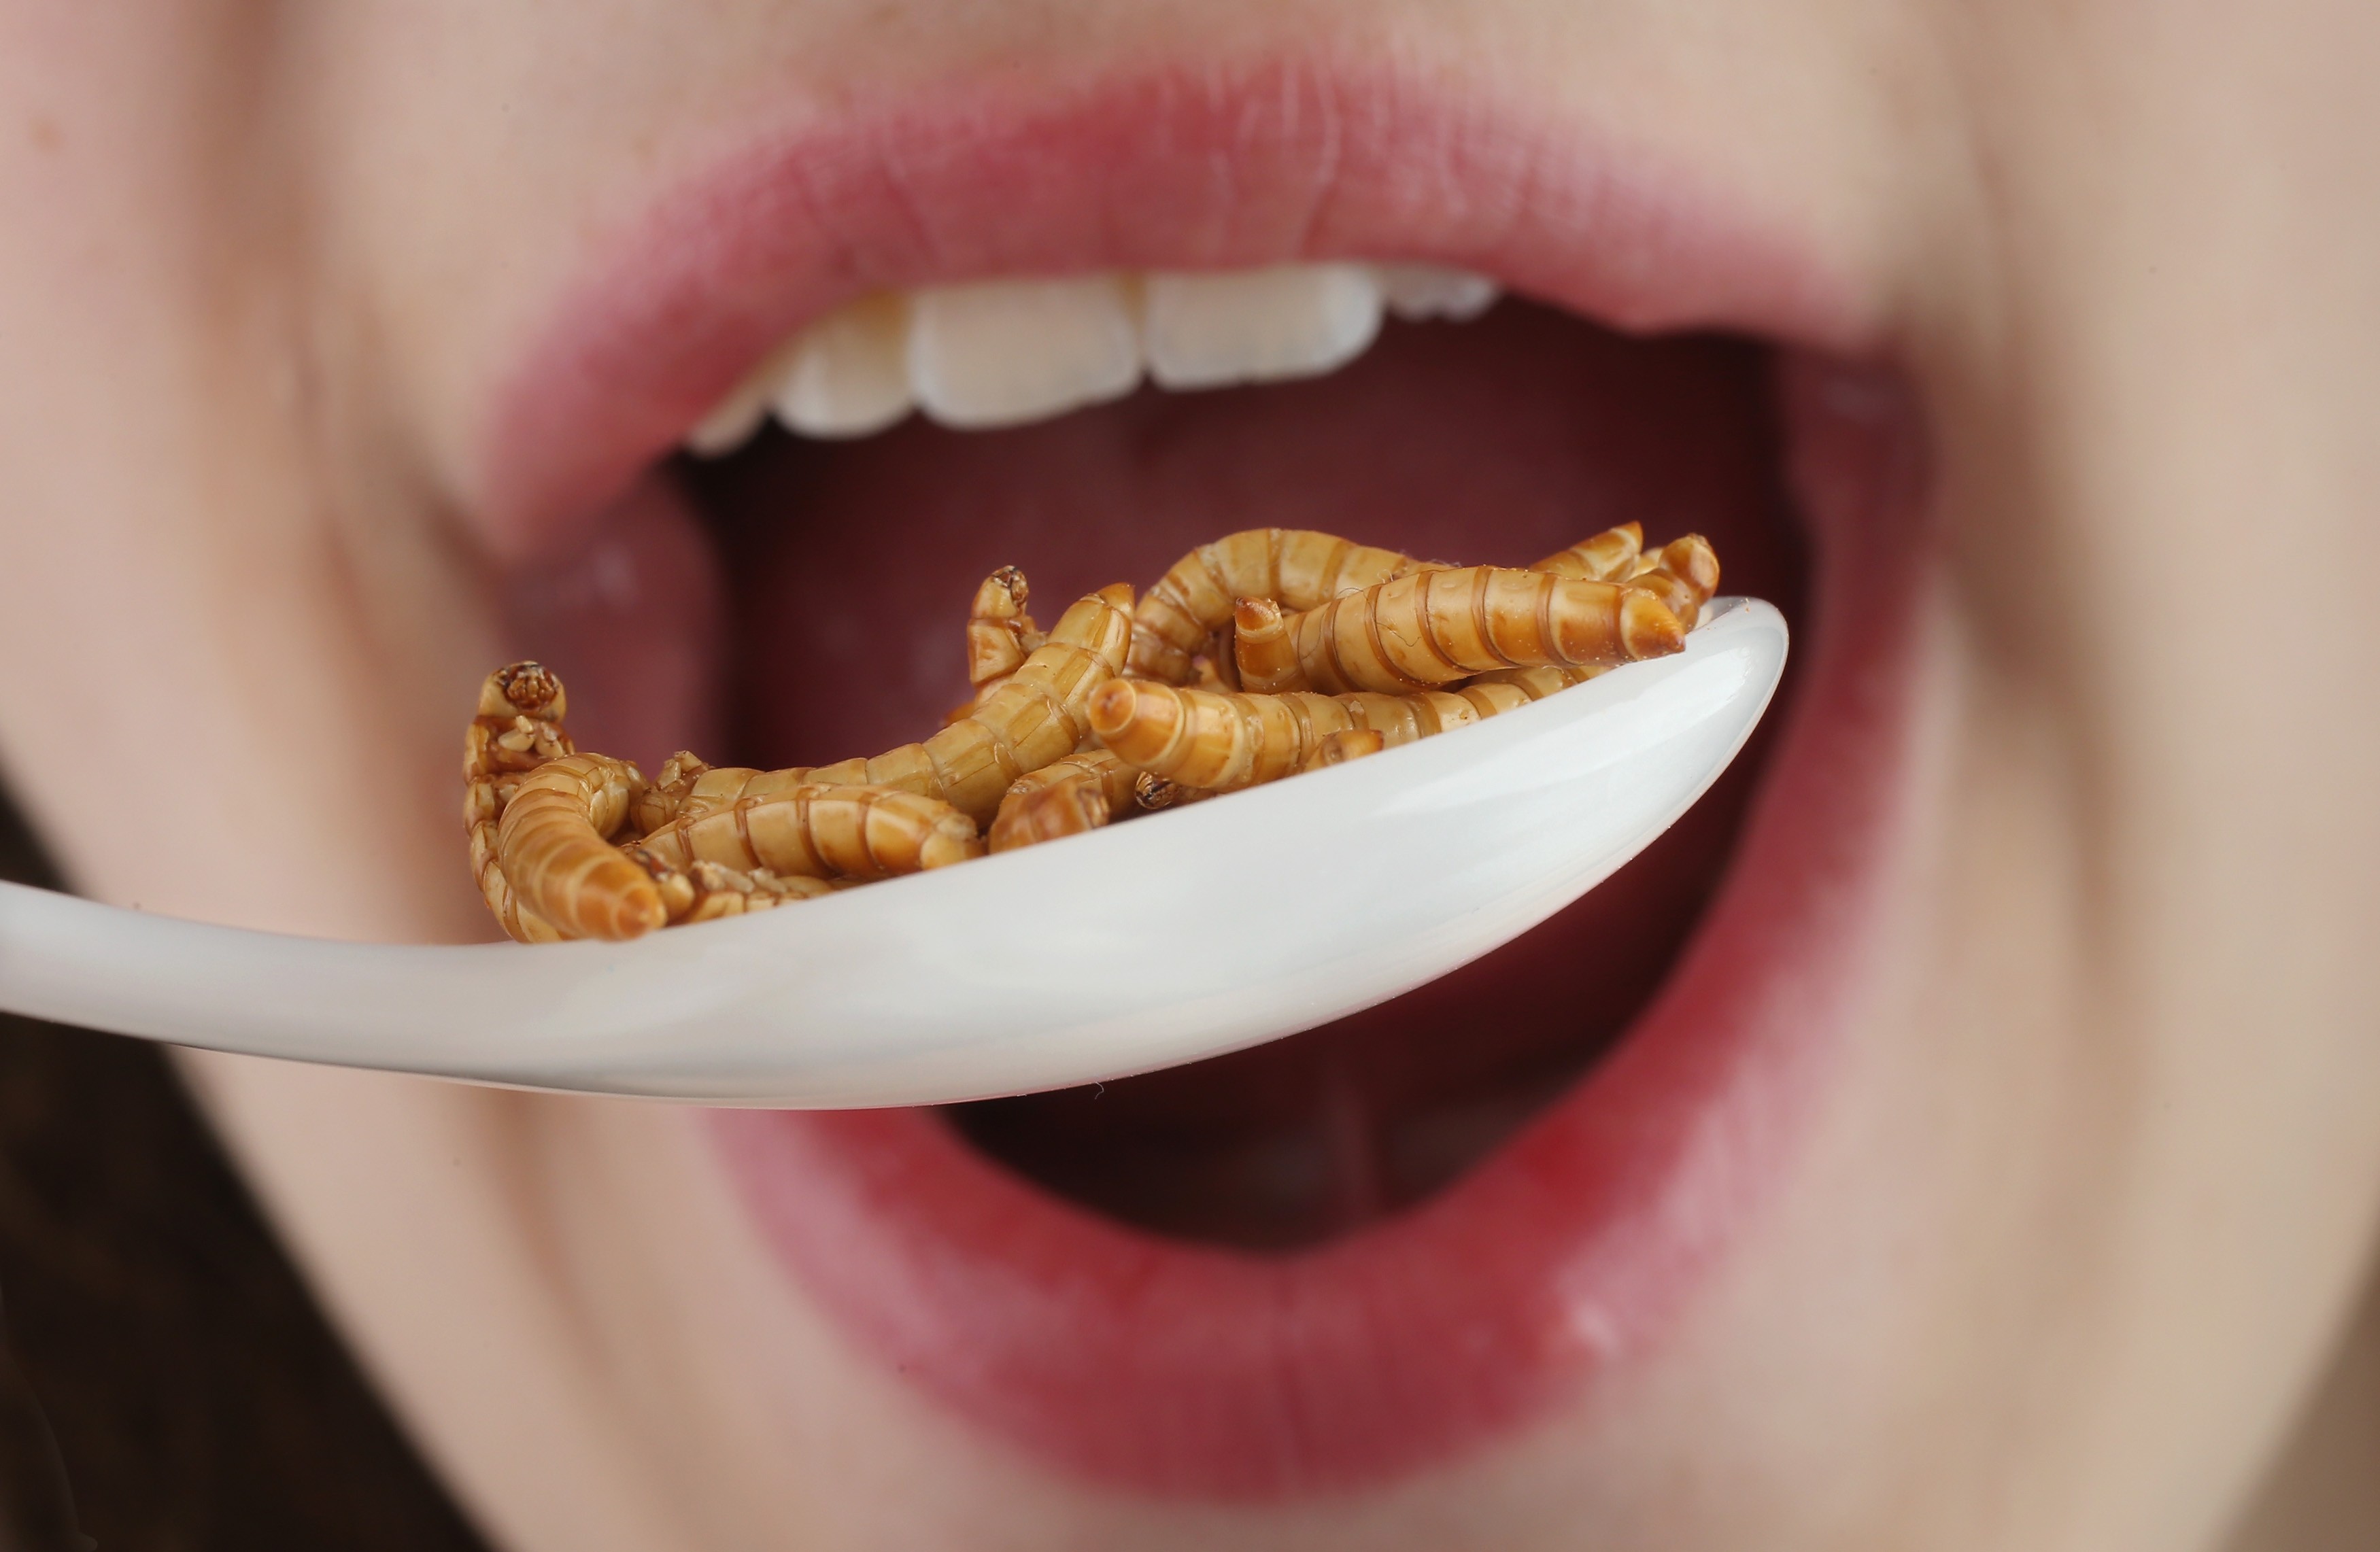 Summer dare: Eat a bug and floss your teeth with the legs